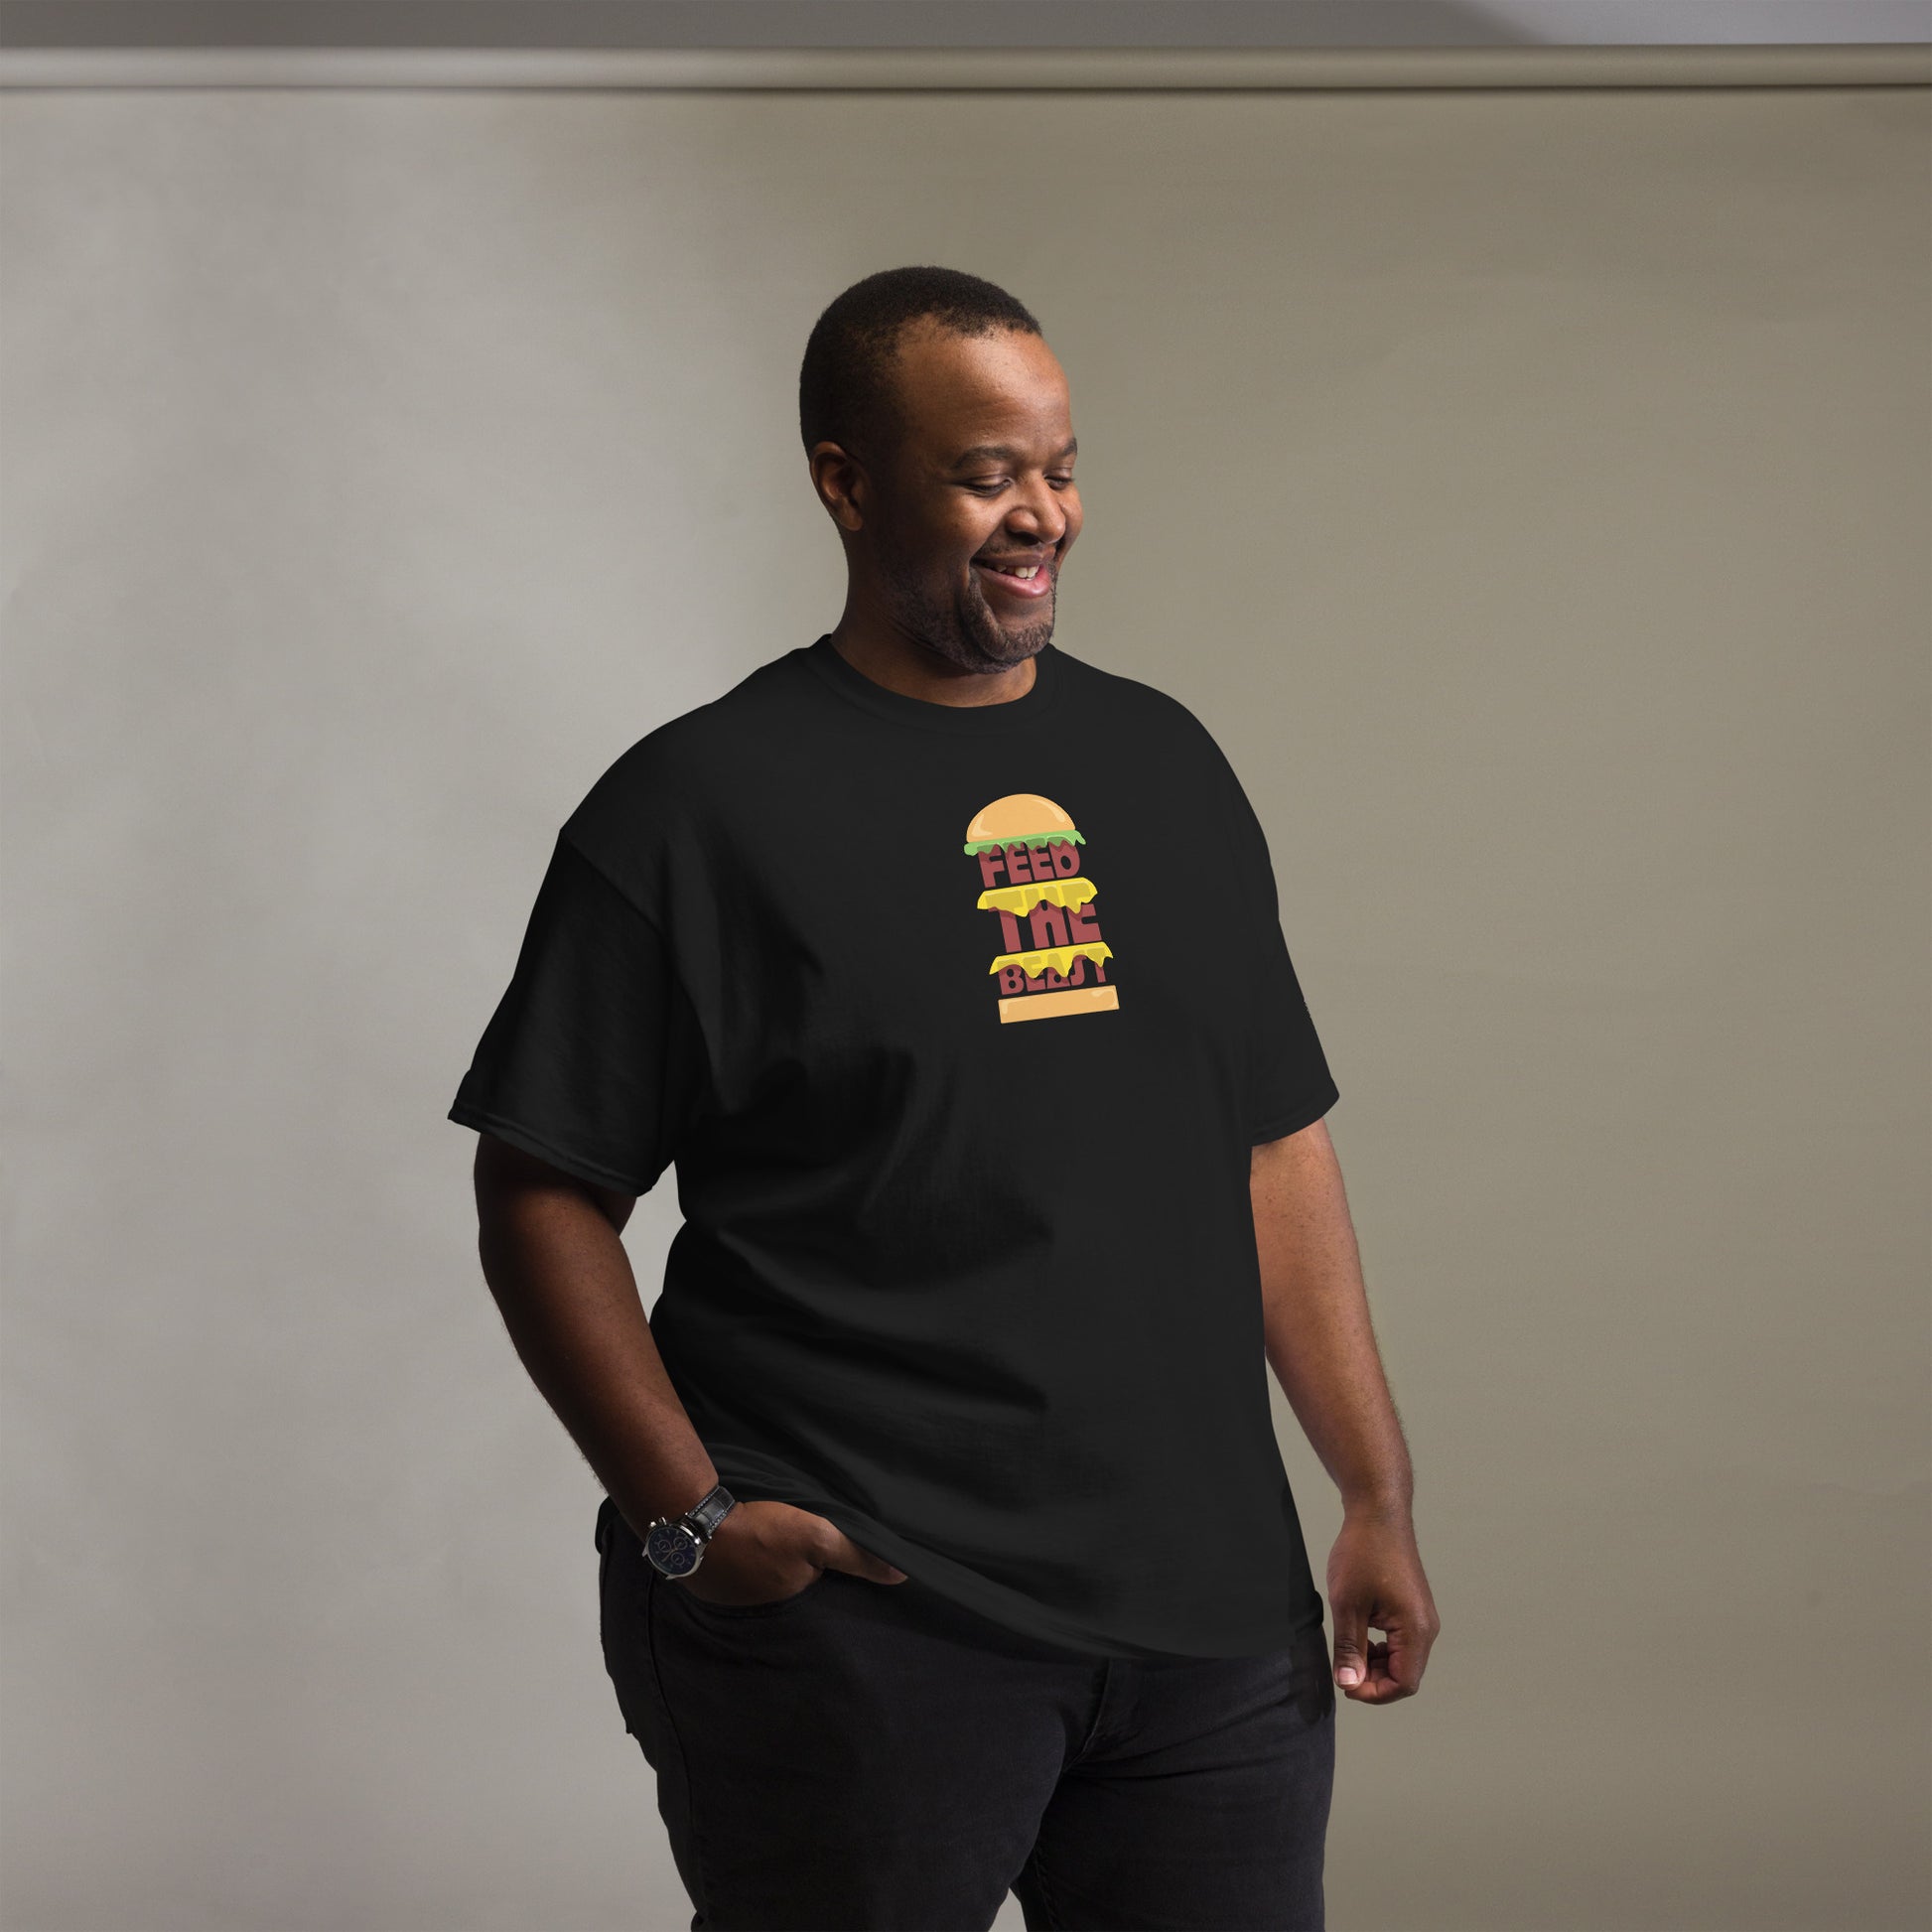 Cheerful man looking down and smiling, wearing a black t-shirt with a colorful 'FEED THE BEAST' burger graphic on the chest, accessorized with a wristwatch, standing in a room with a grey gradient background.